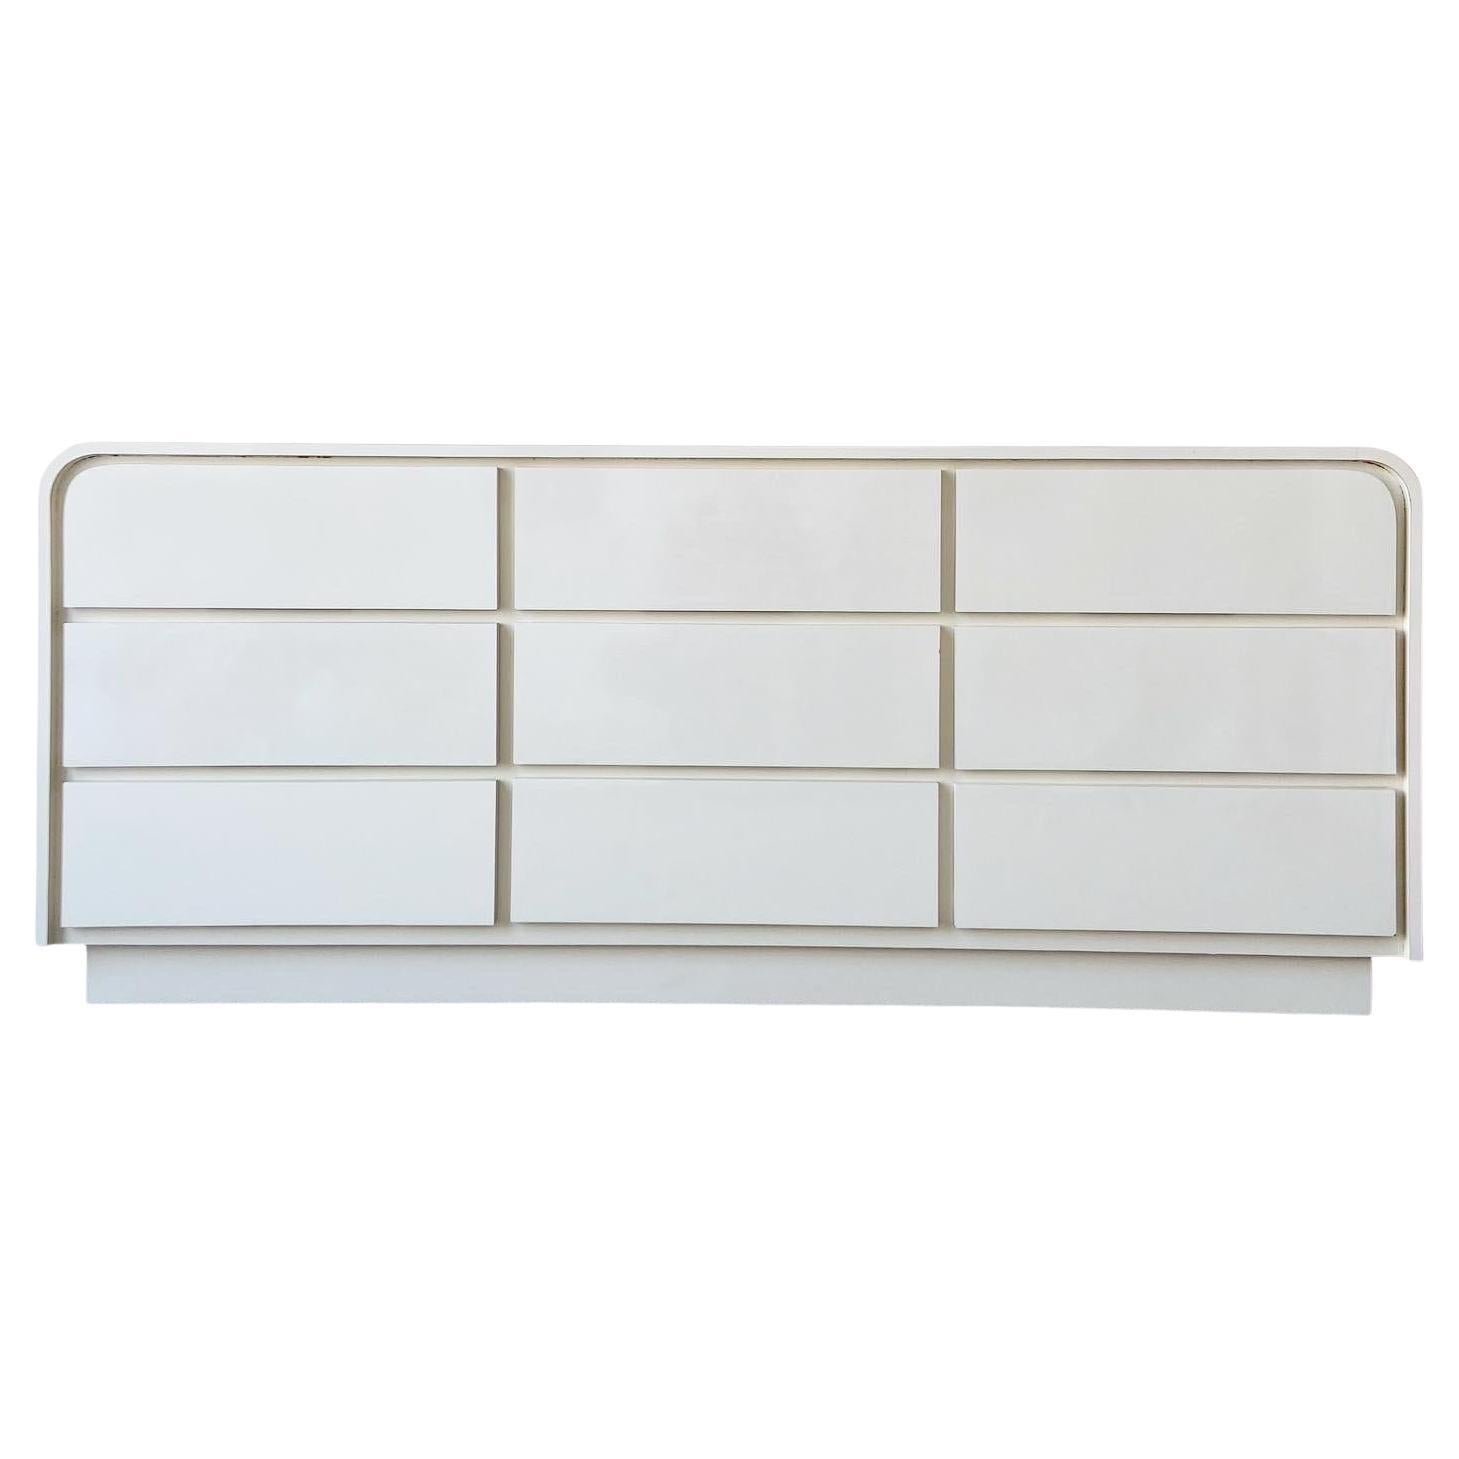 Postmodern Ivory Lacquer Laminate Waterfall Dresser, 9 Drawers